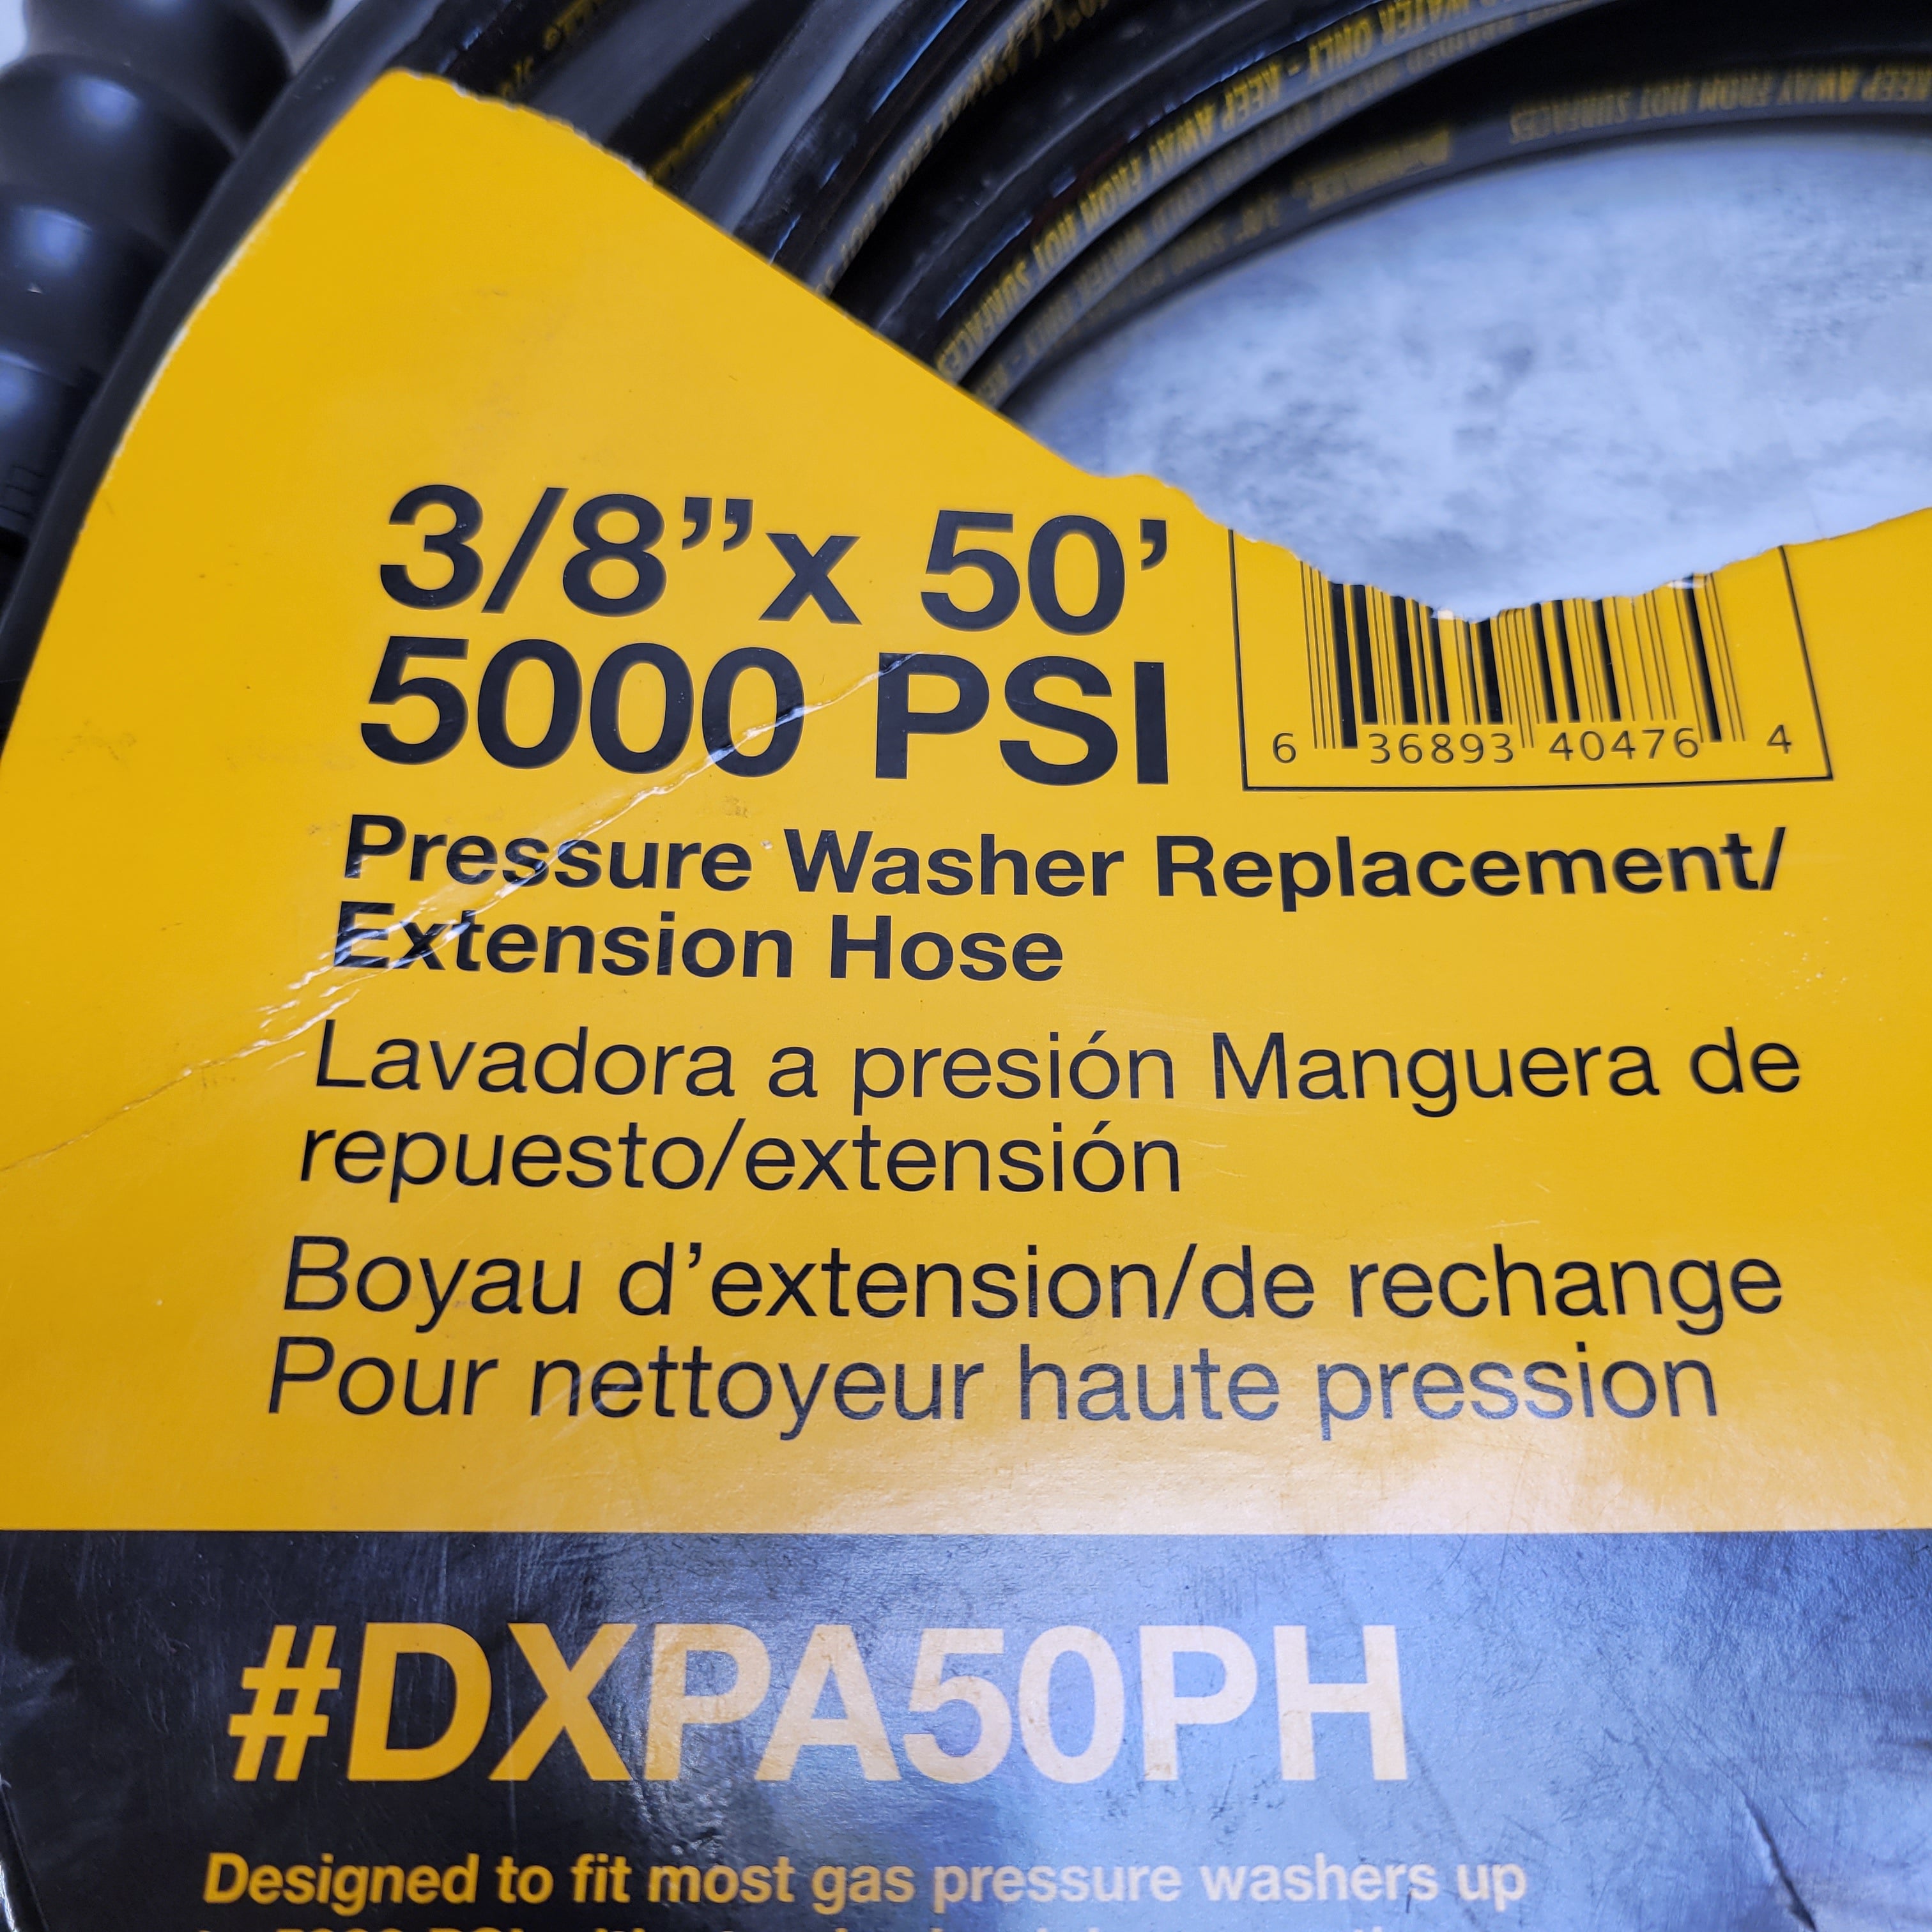 DEWALT 3/8 in. x 50 ft. 5000 PSI Replacement/Extension Hose (7624184955118)